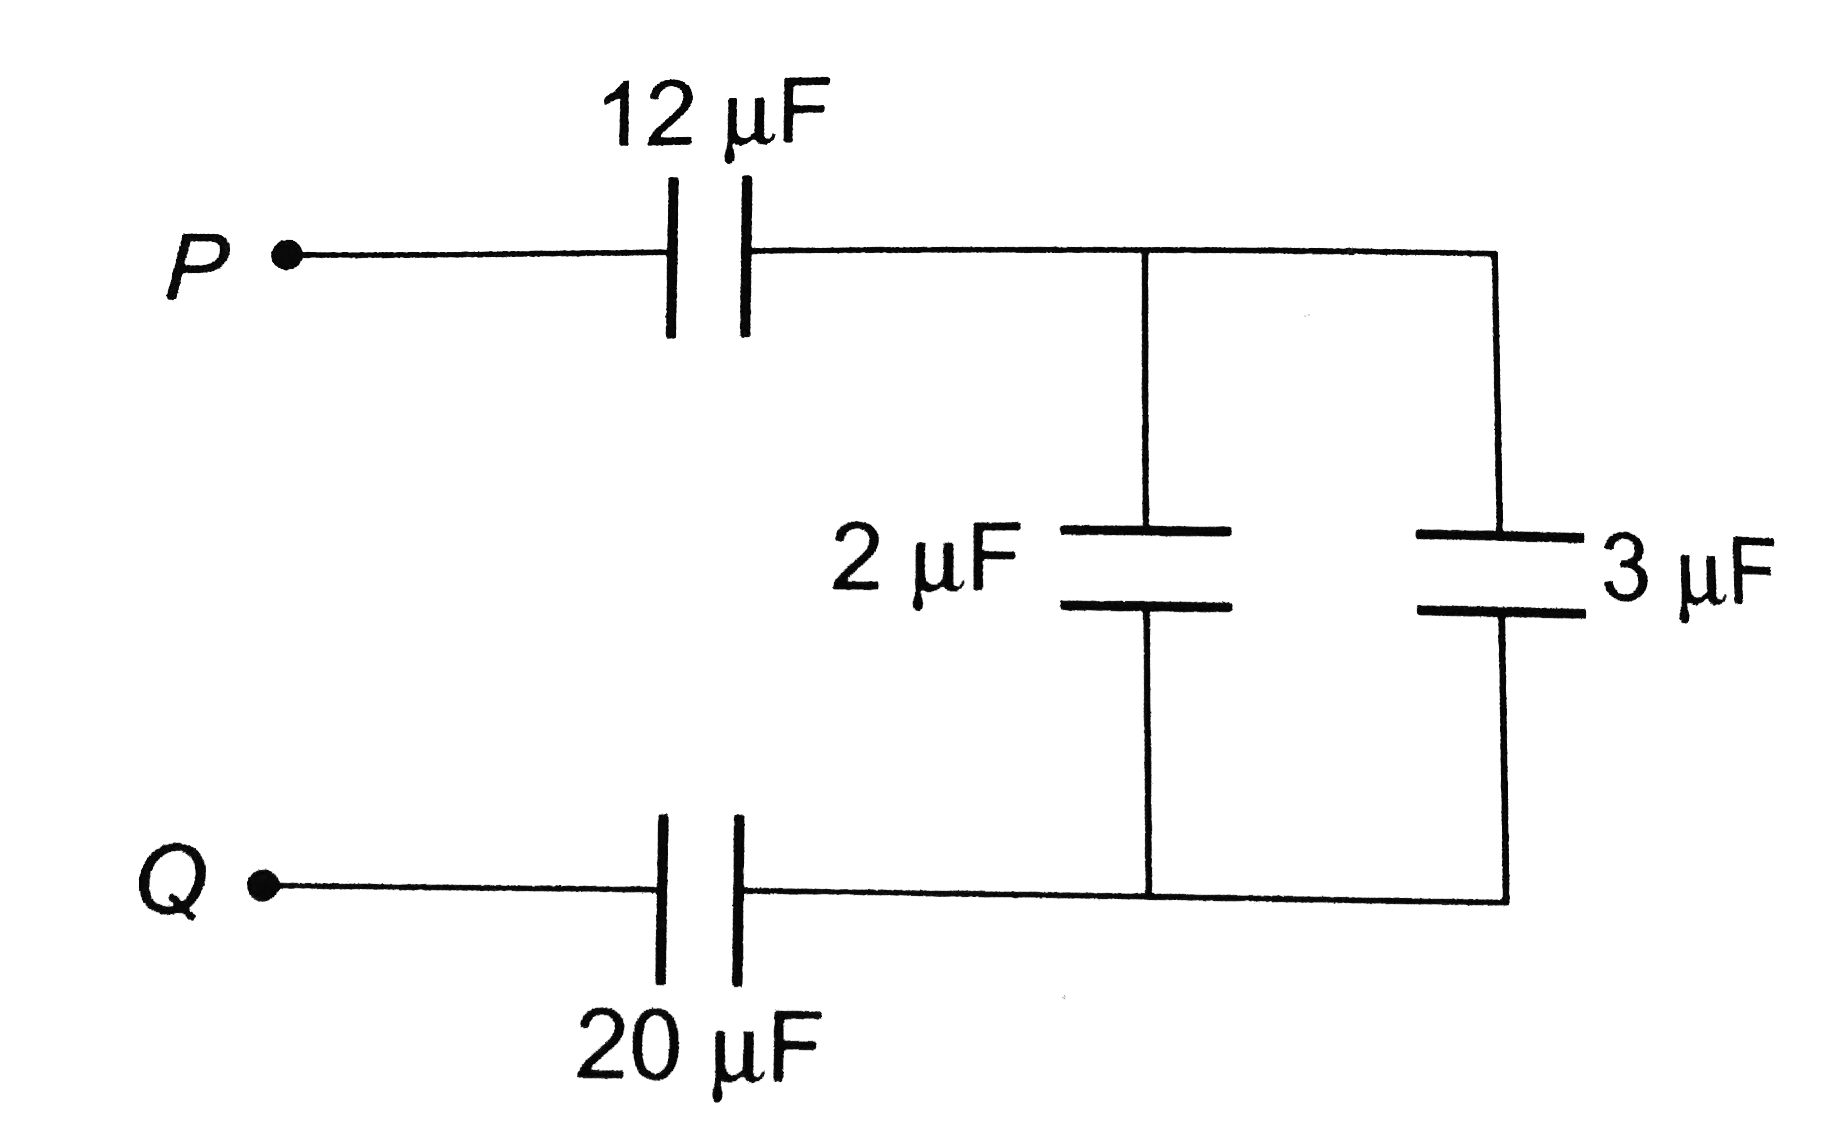 In the circuit diagram shown in the adjoining figure, the resultant capacitance between P and Q is